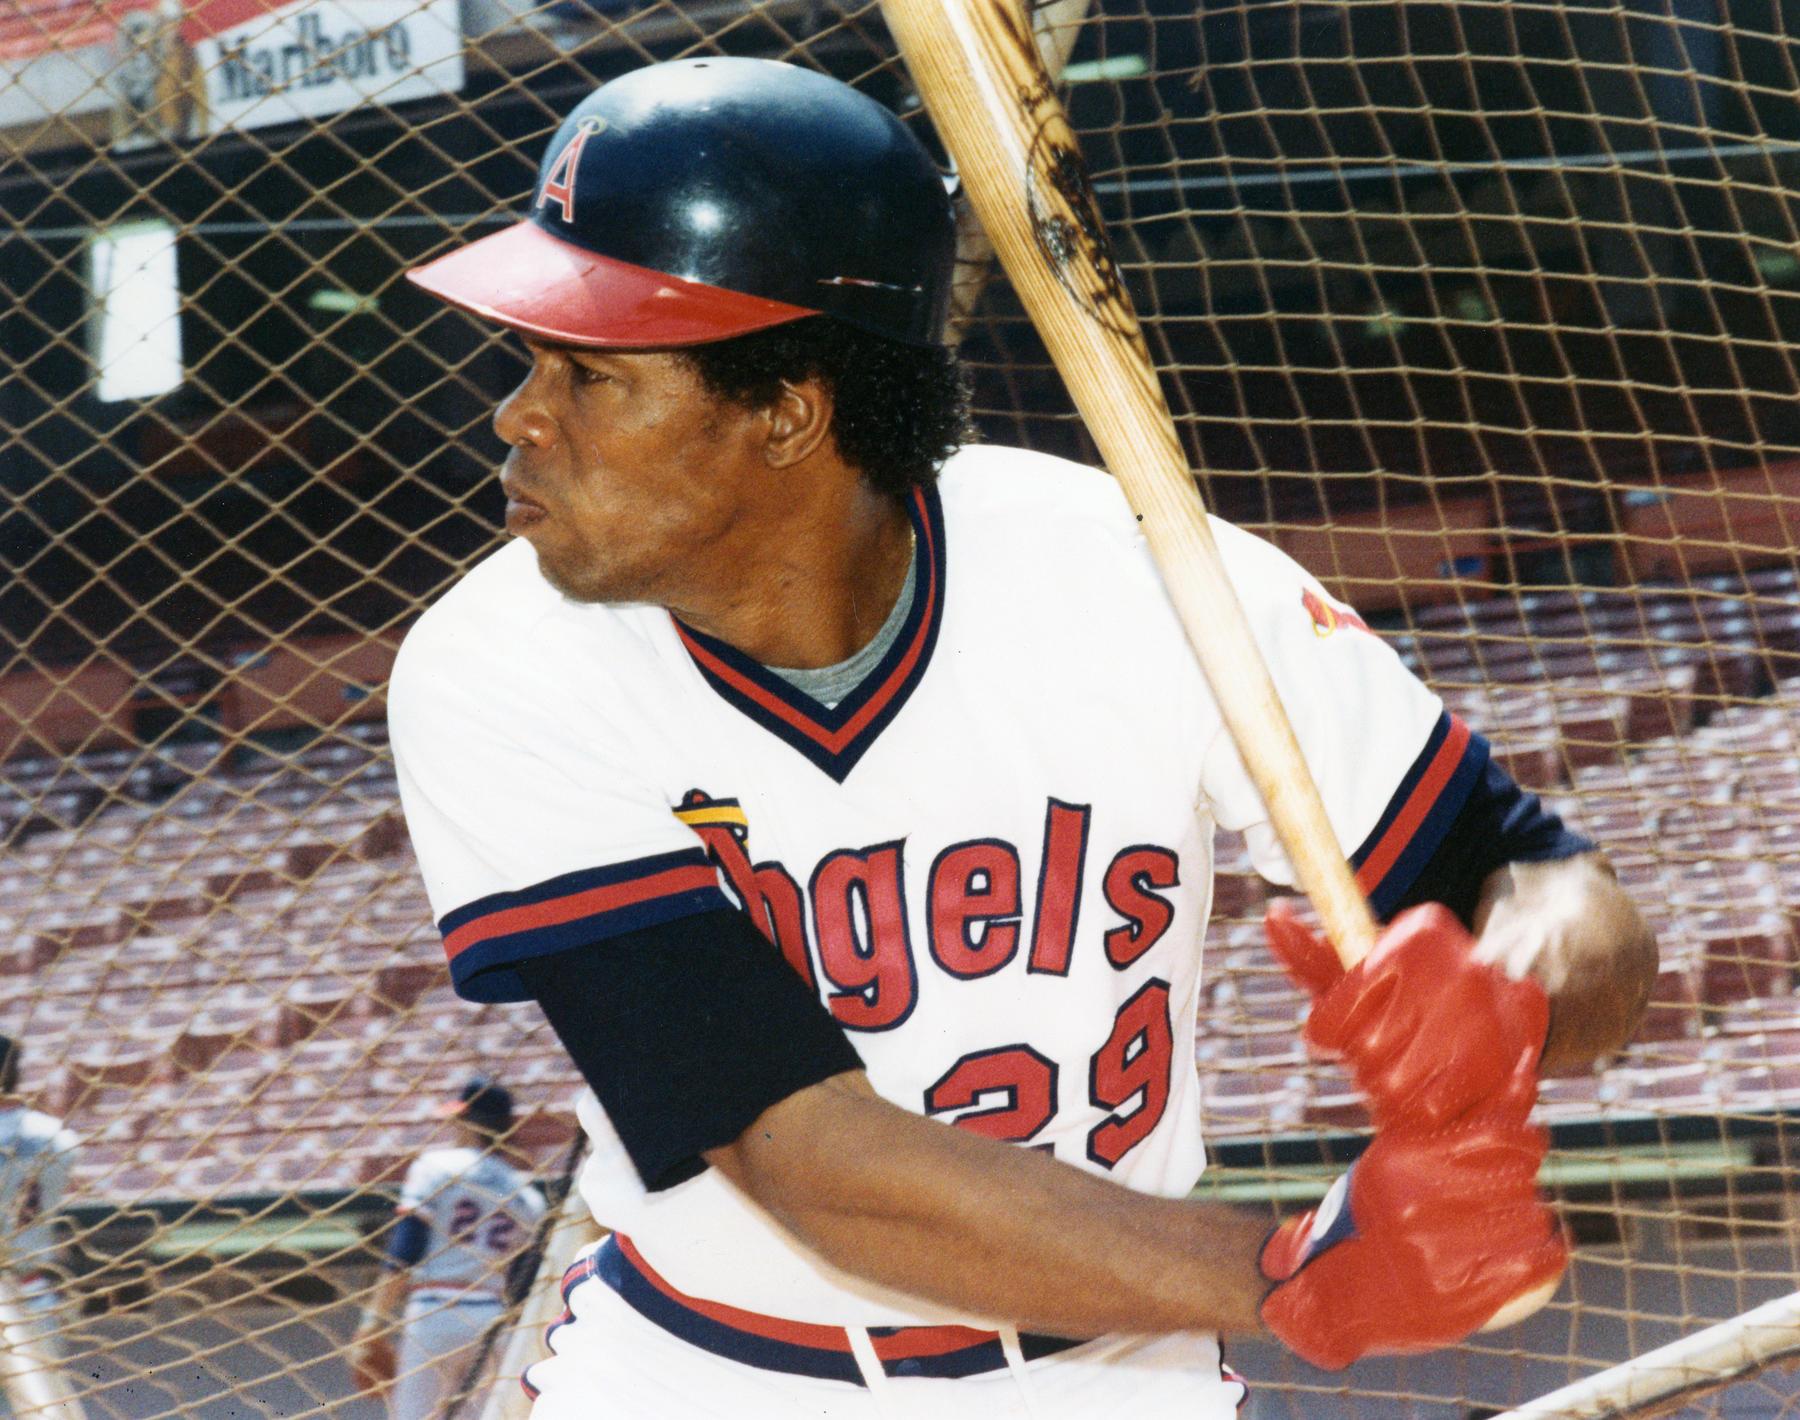 Carew records 3,000th hit in classic style | Baseball Hall of Fame